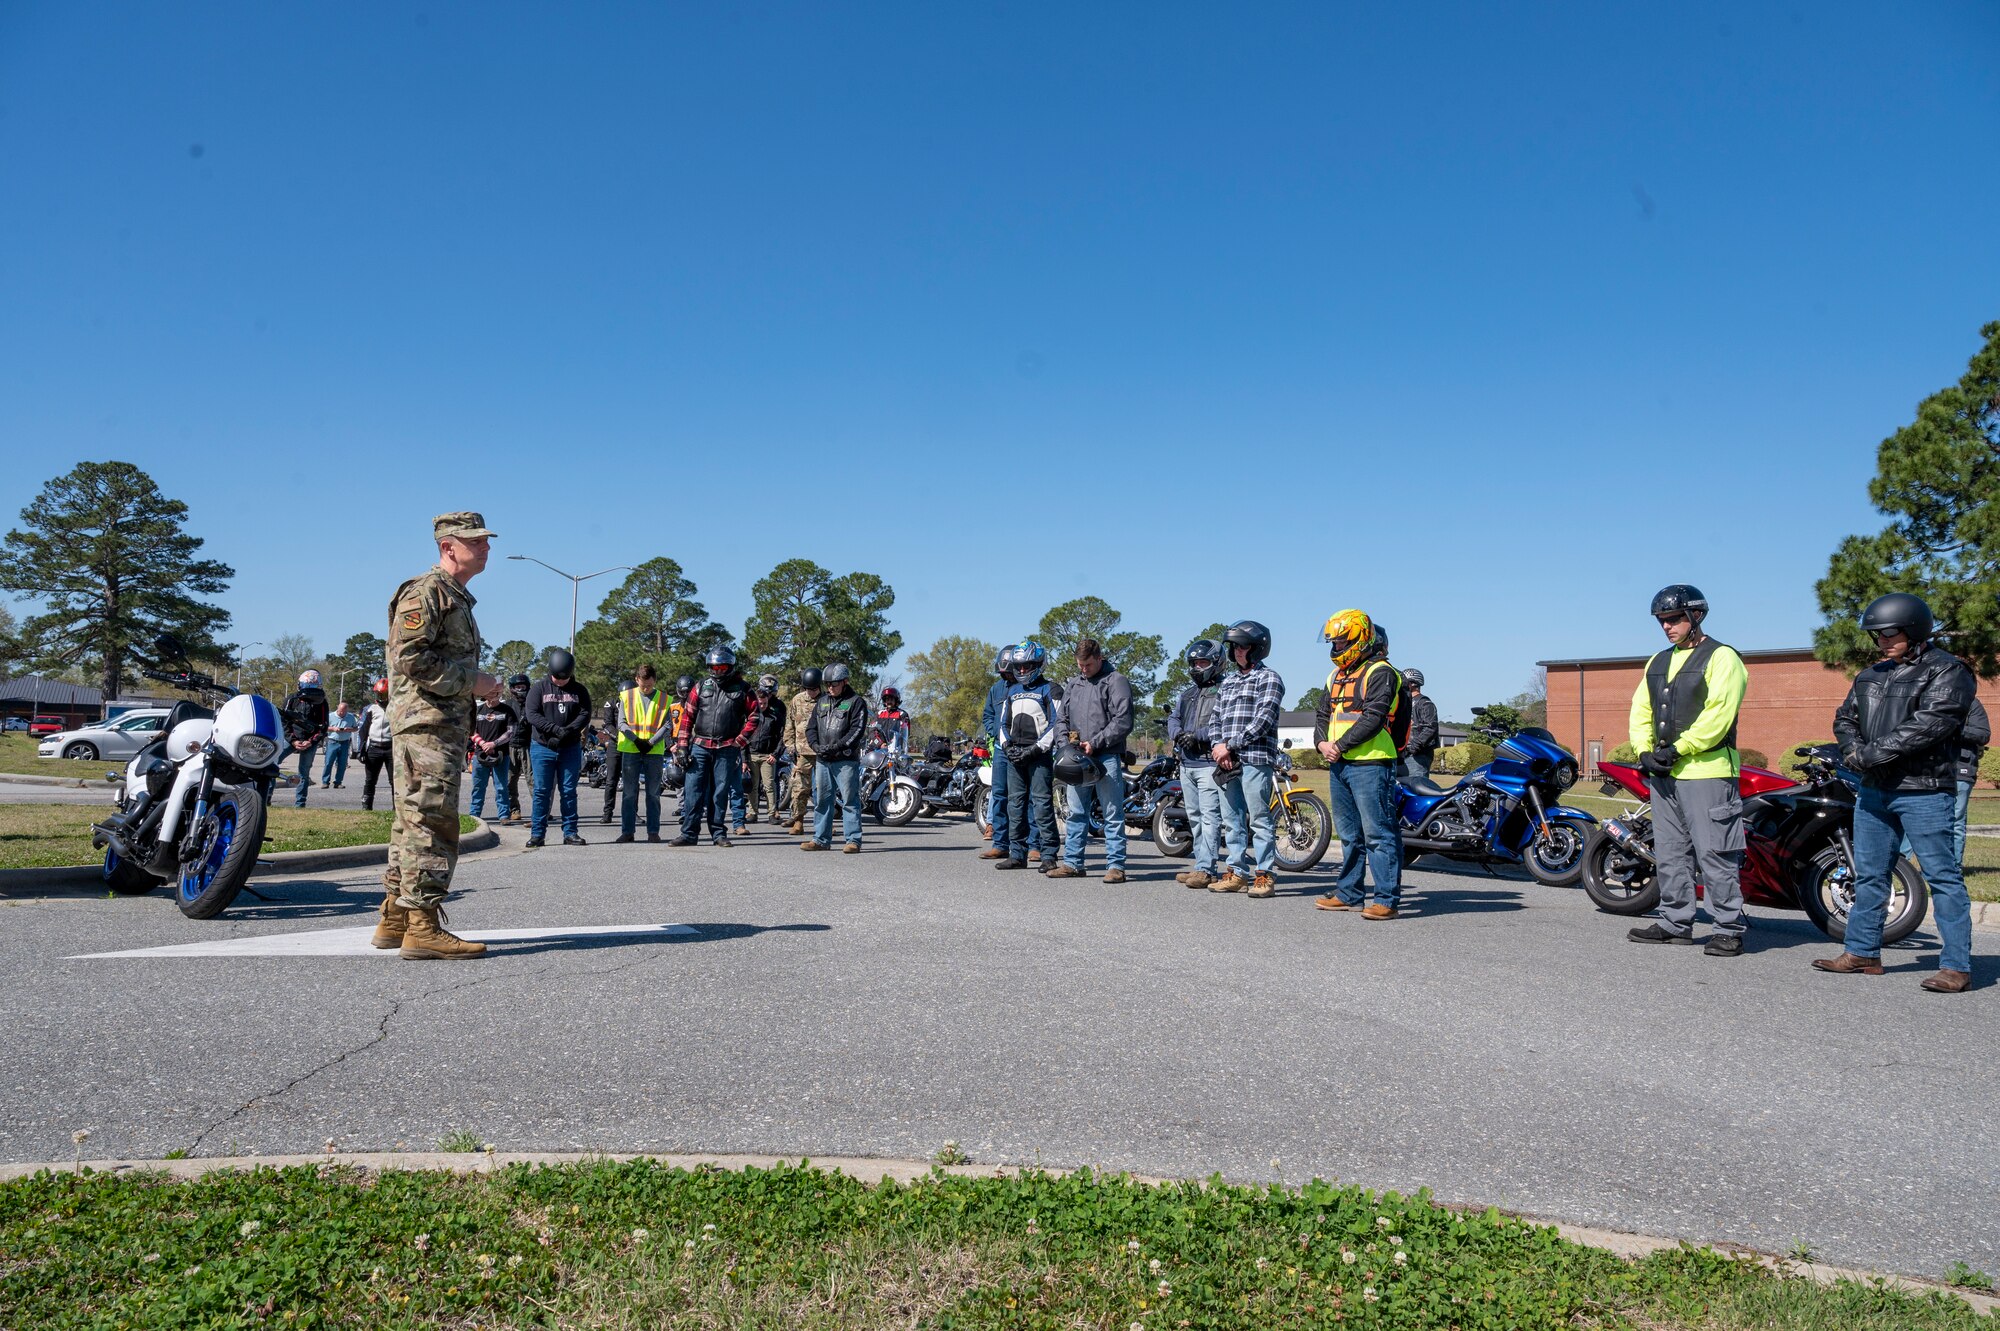 Chaplain (Capt.) David Shrader, 4th Fighter Wing, left, gives members assigned to the 4th Fighter Wing an invocation before their motorcycle mentorship ride at Seymour Johnson Air Force Base, North Carolina, April 1, 2022.